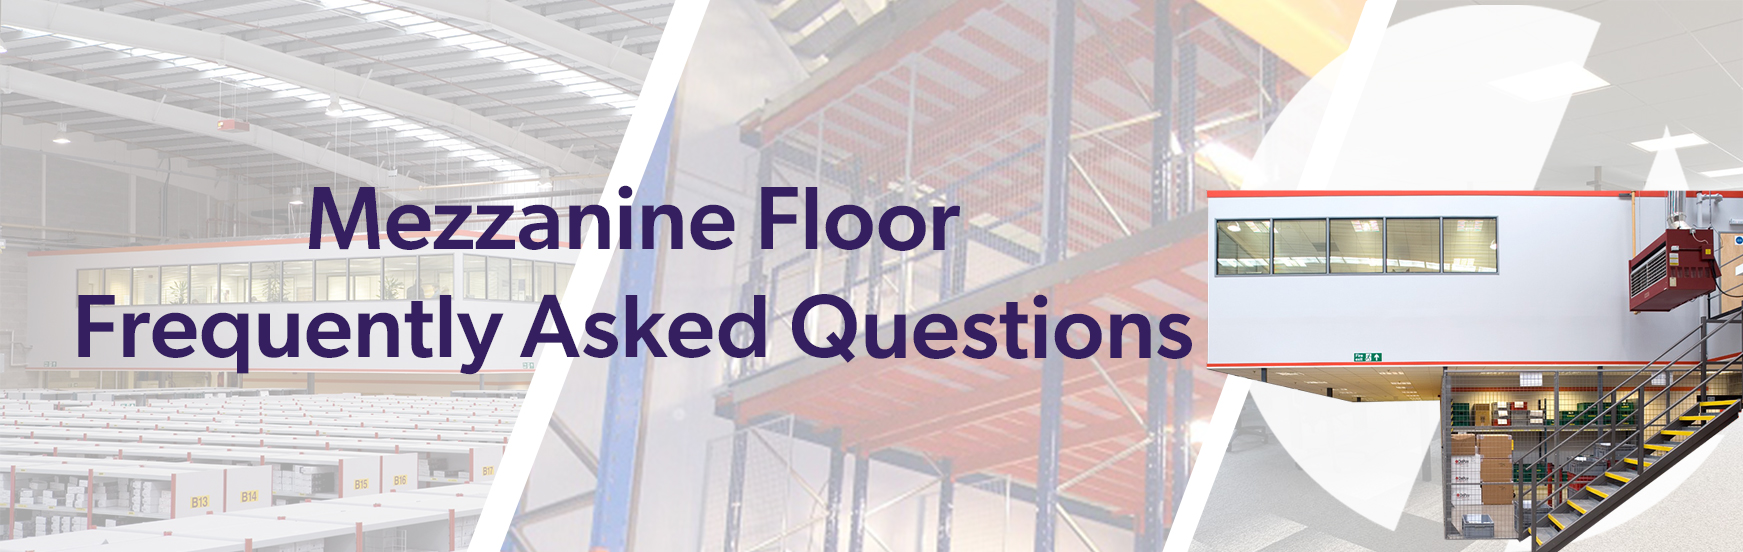  Mezzanine Floor Frequently Asked Questions